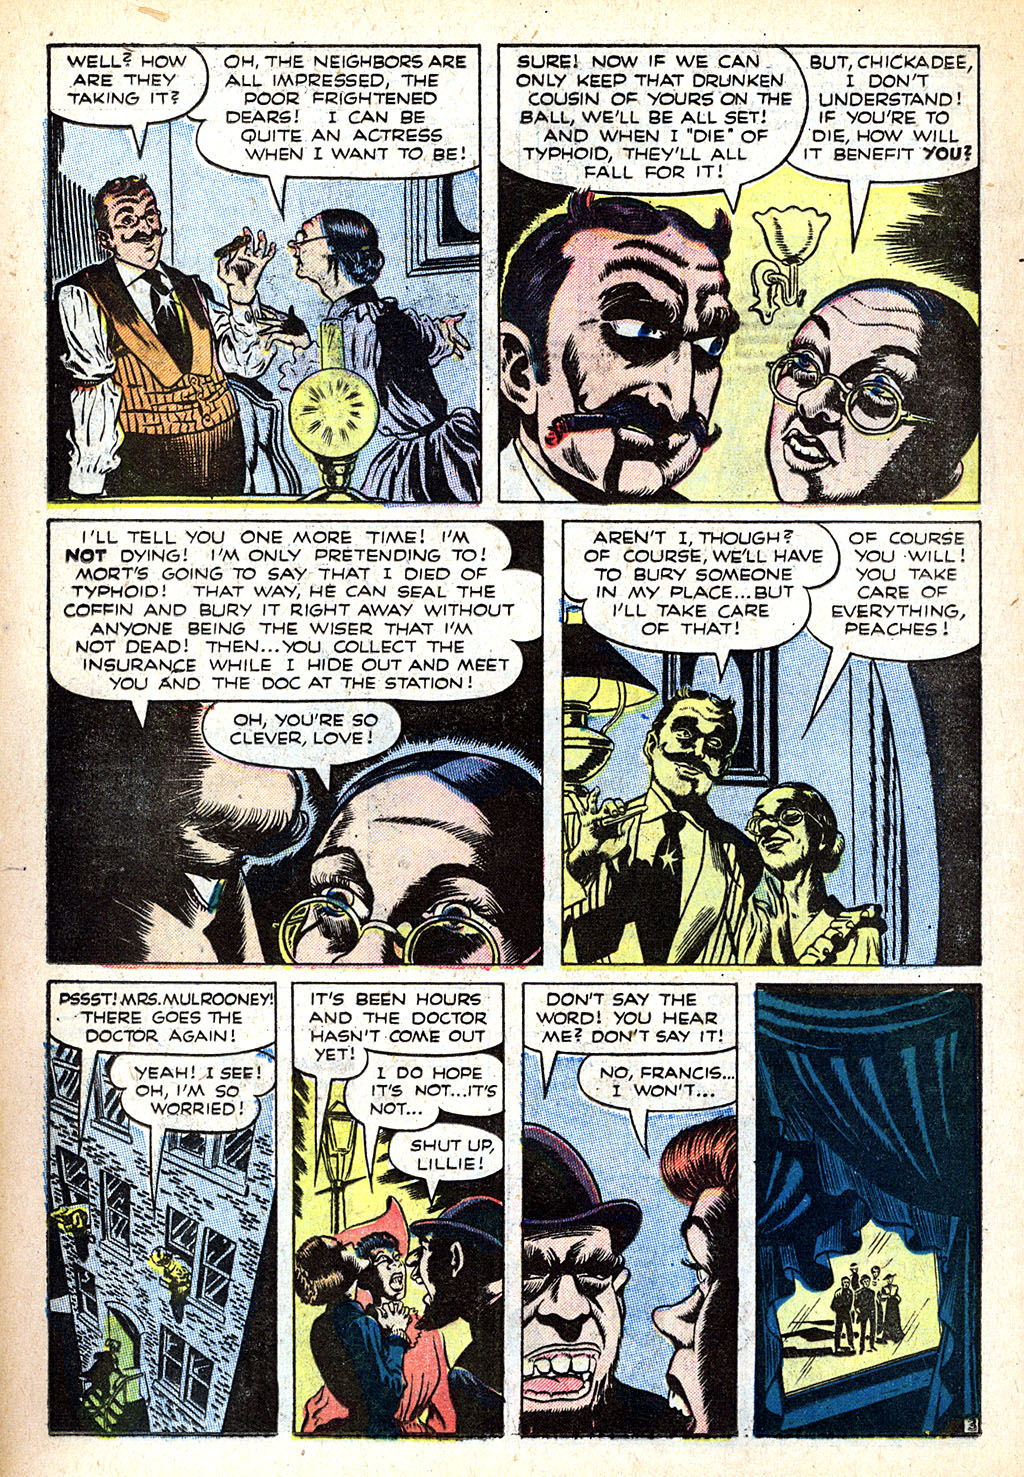 Marvel Tales (1949) 118 Page 11